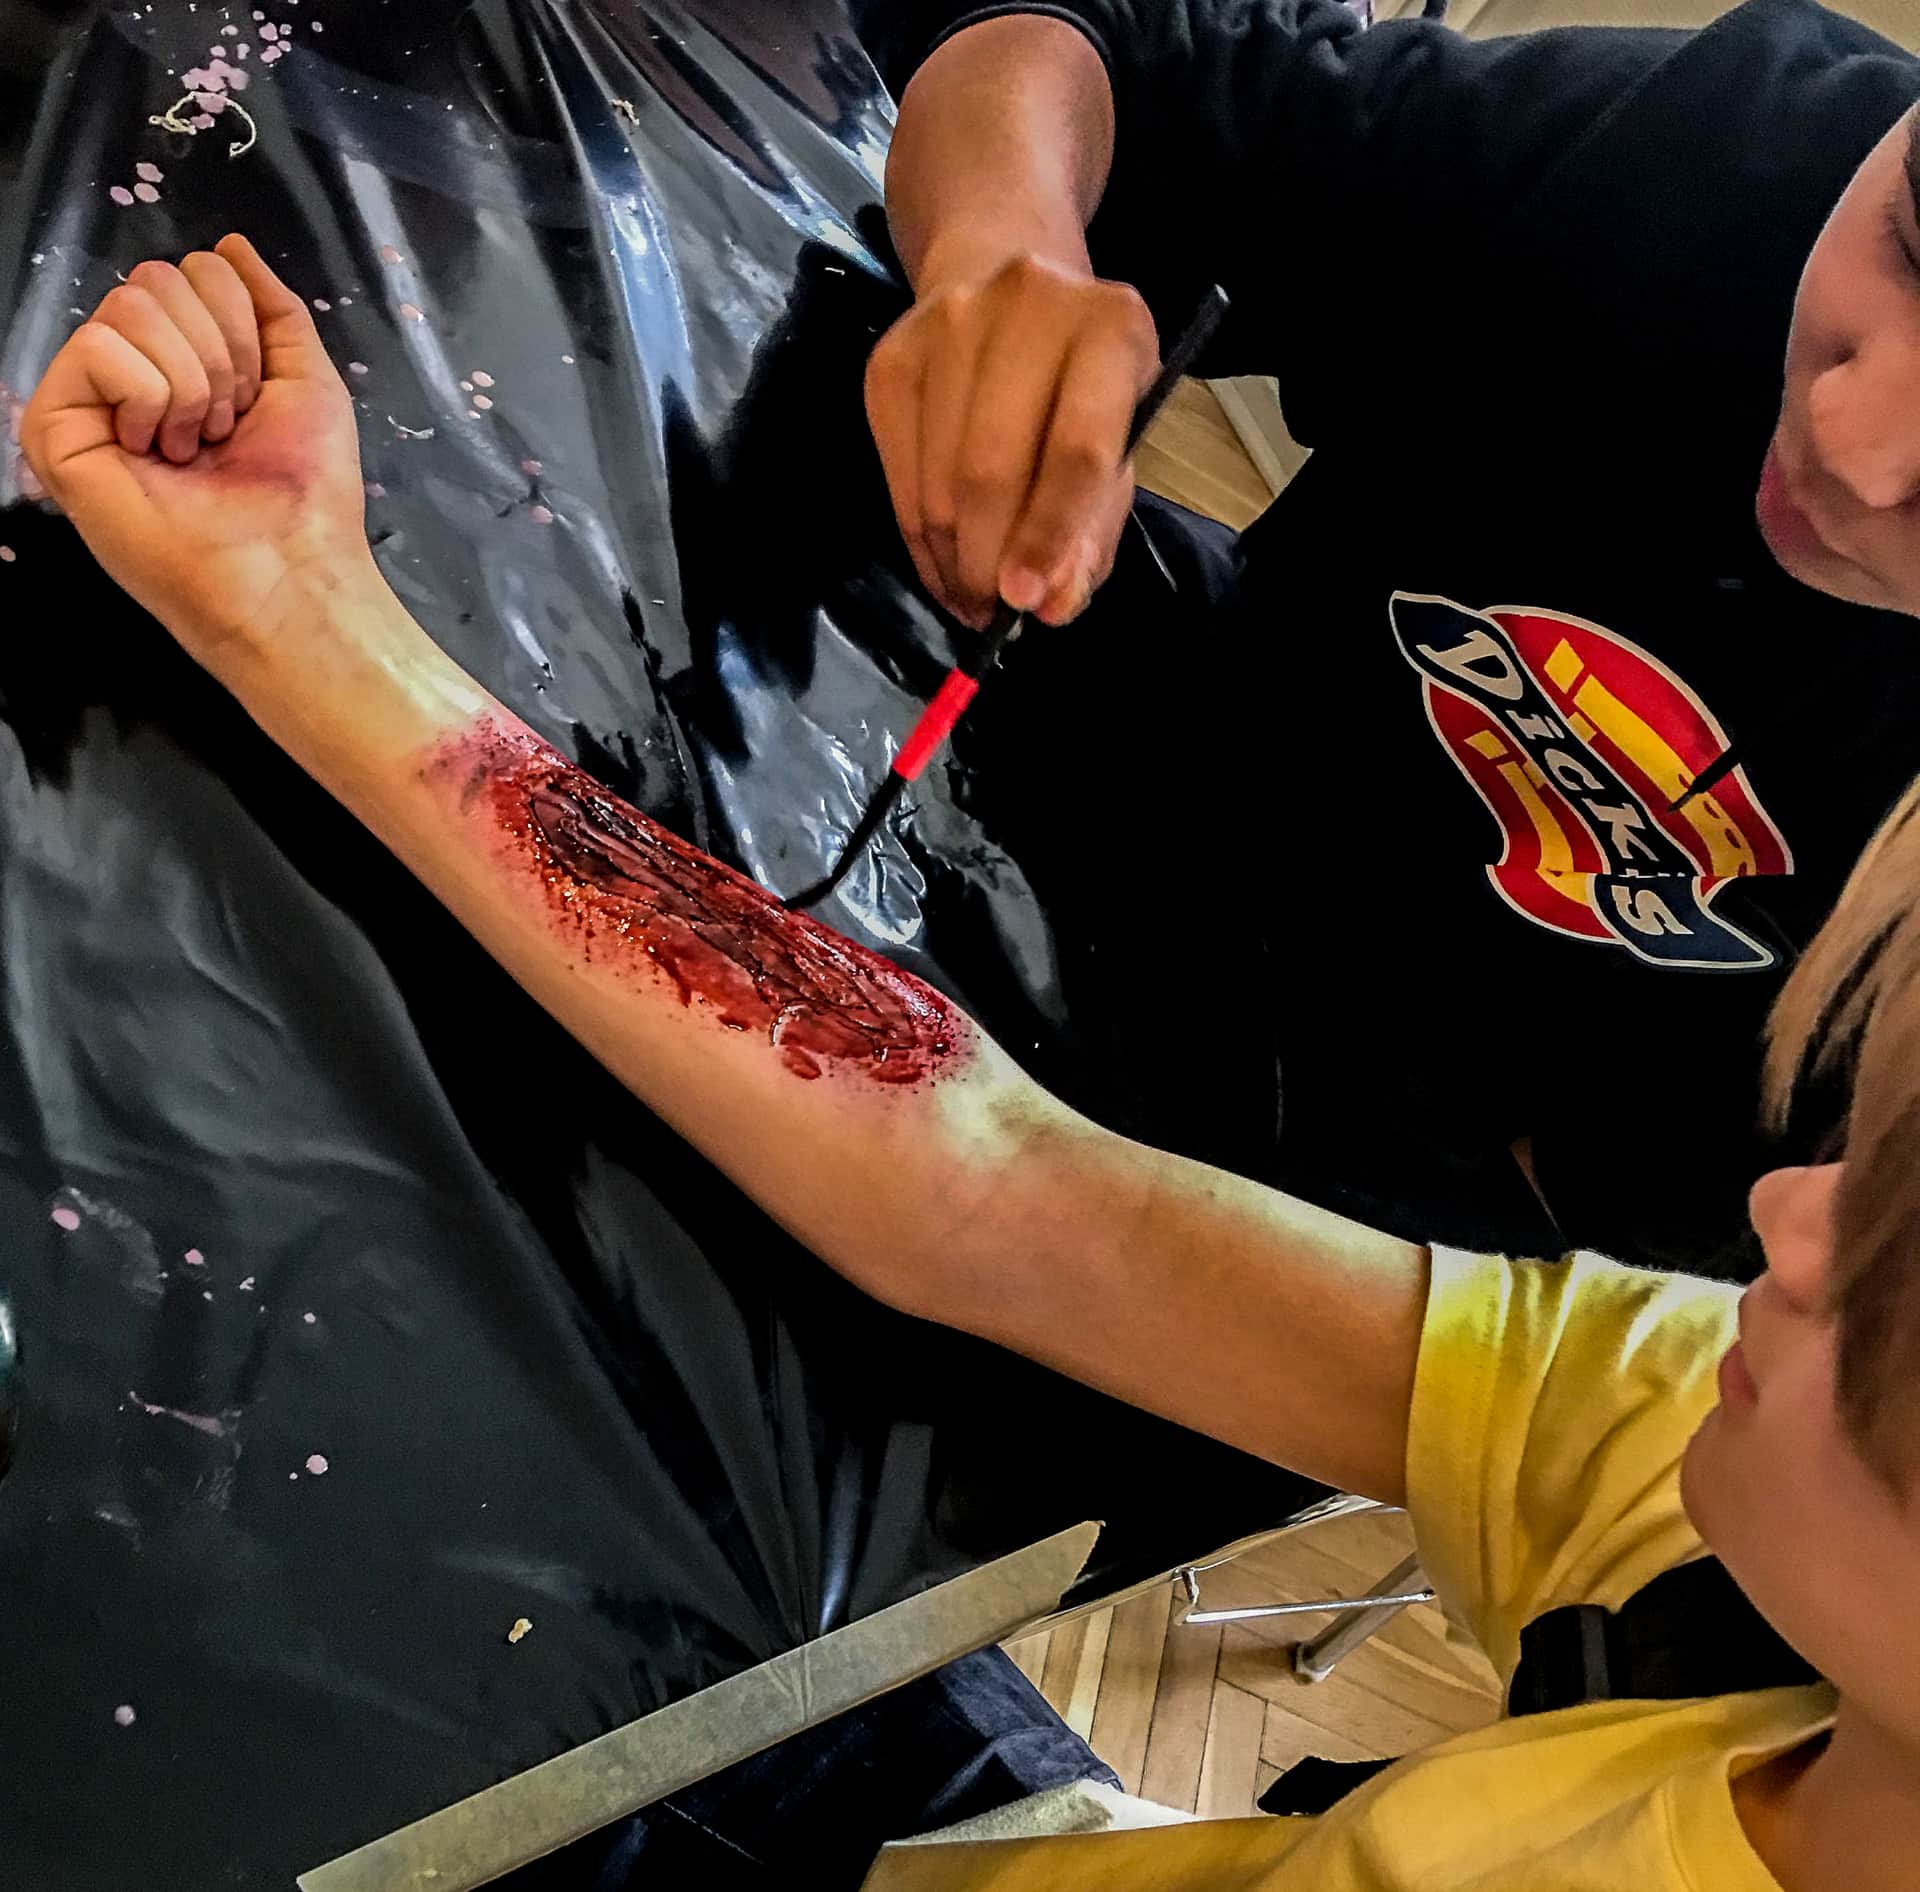 Wounds special effects workshop